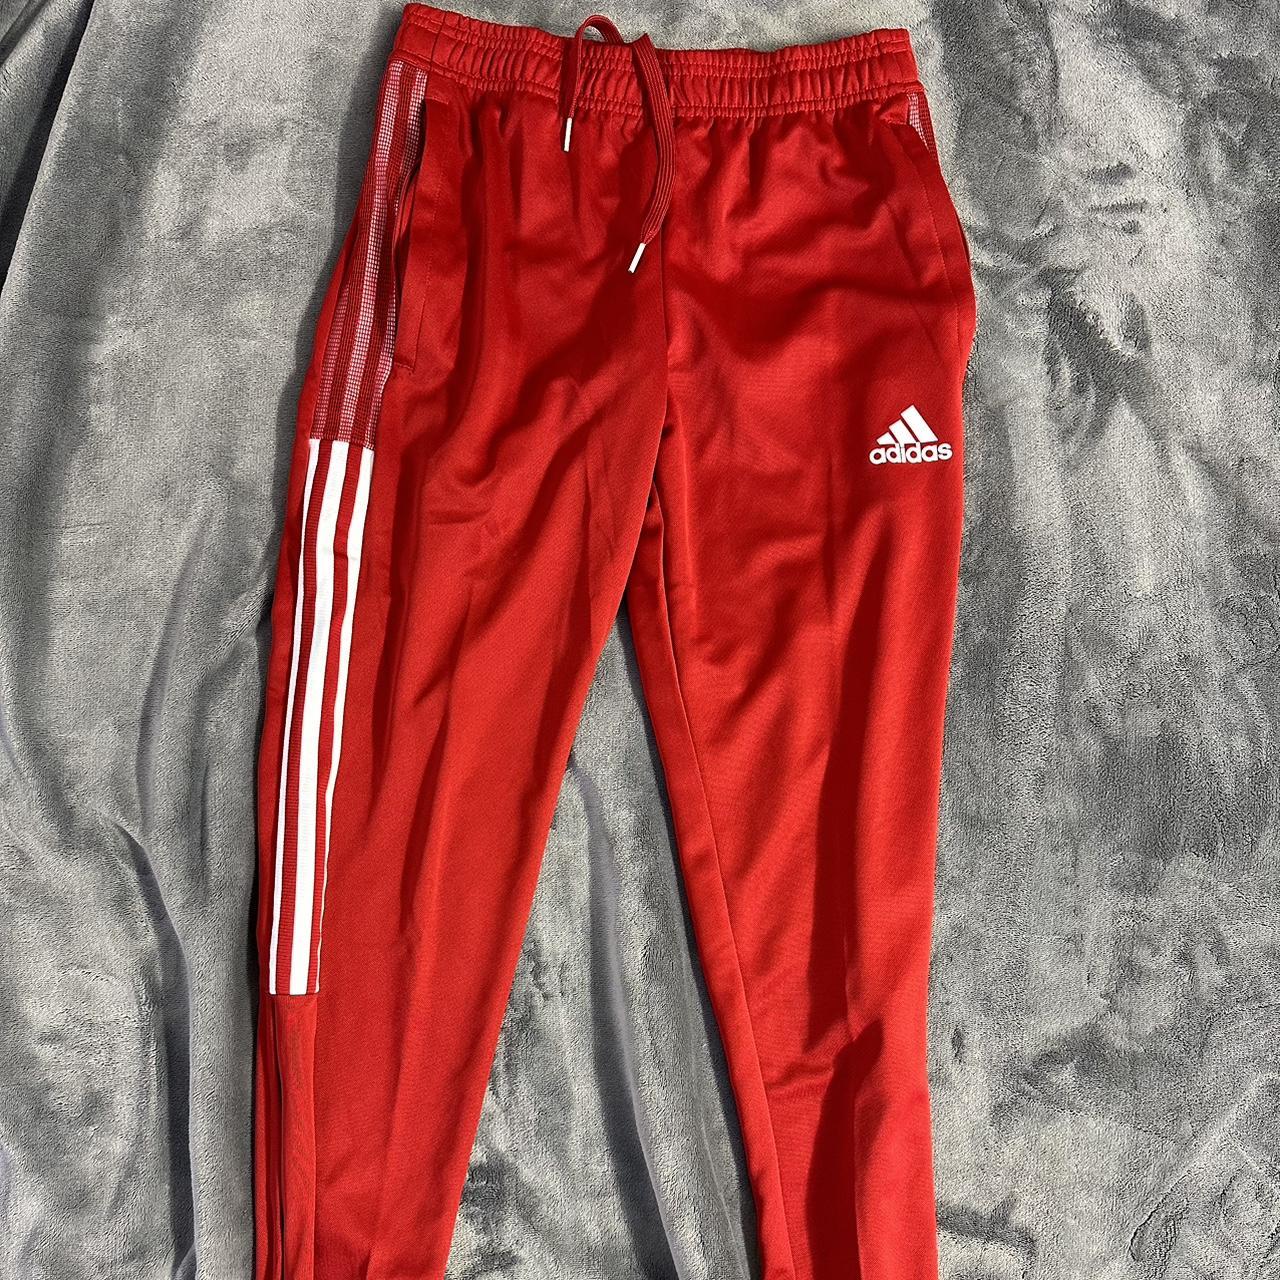 Red Adidas Track Pants, Size Small, Excellent... - Depop